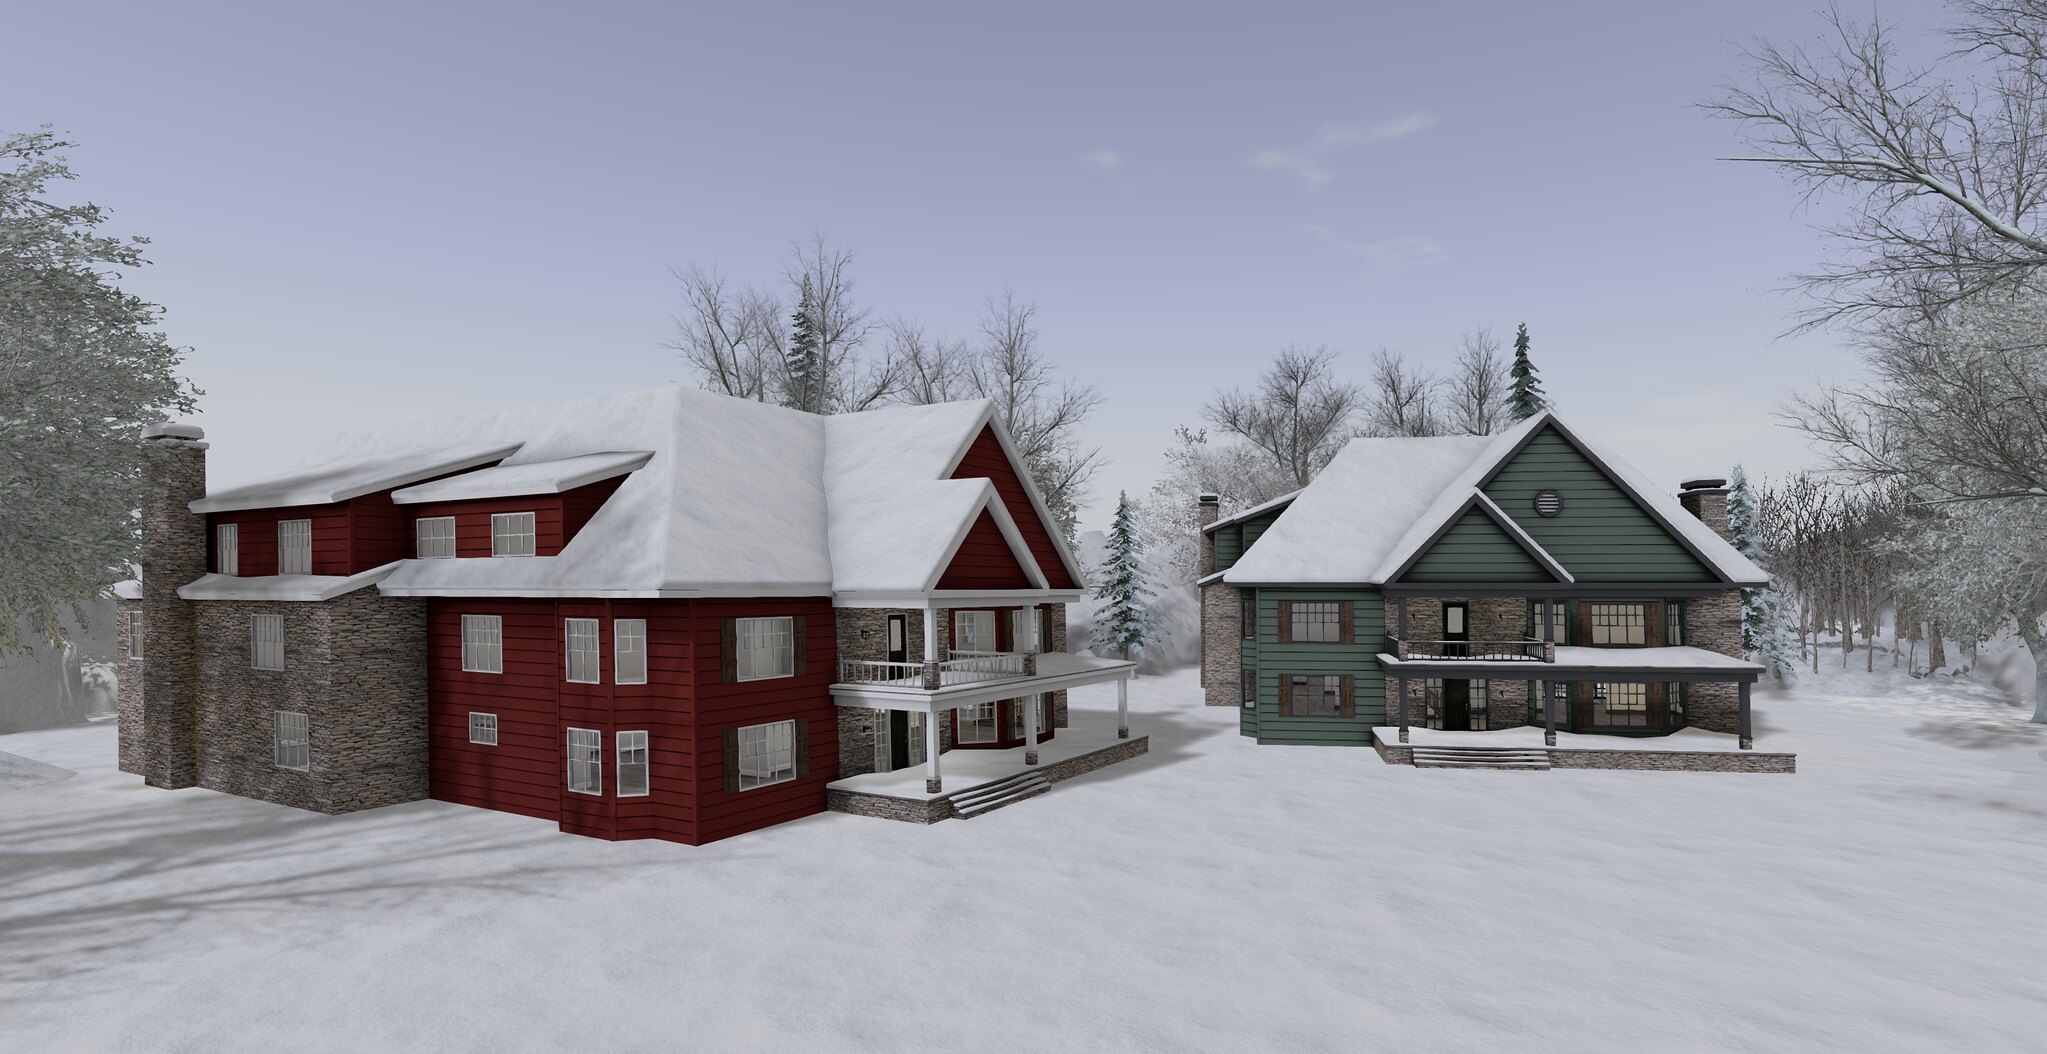 The Green Door – Snow Add-ons for the Rydin Manor